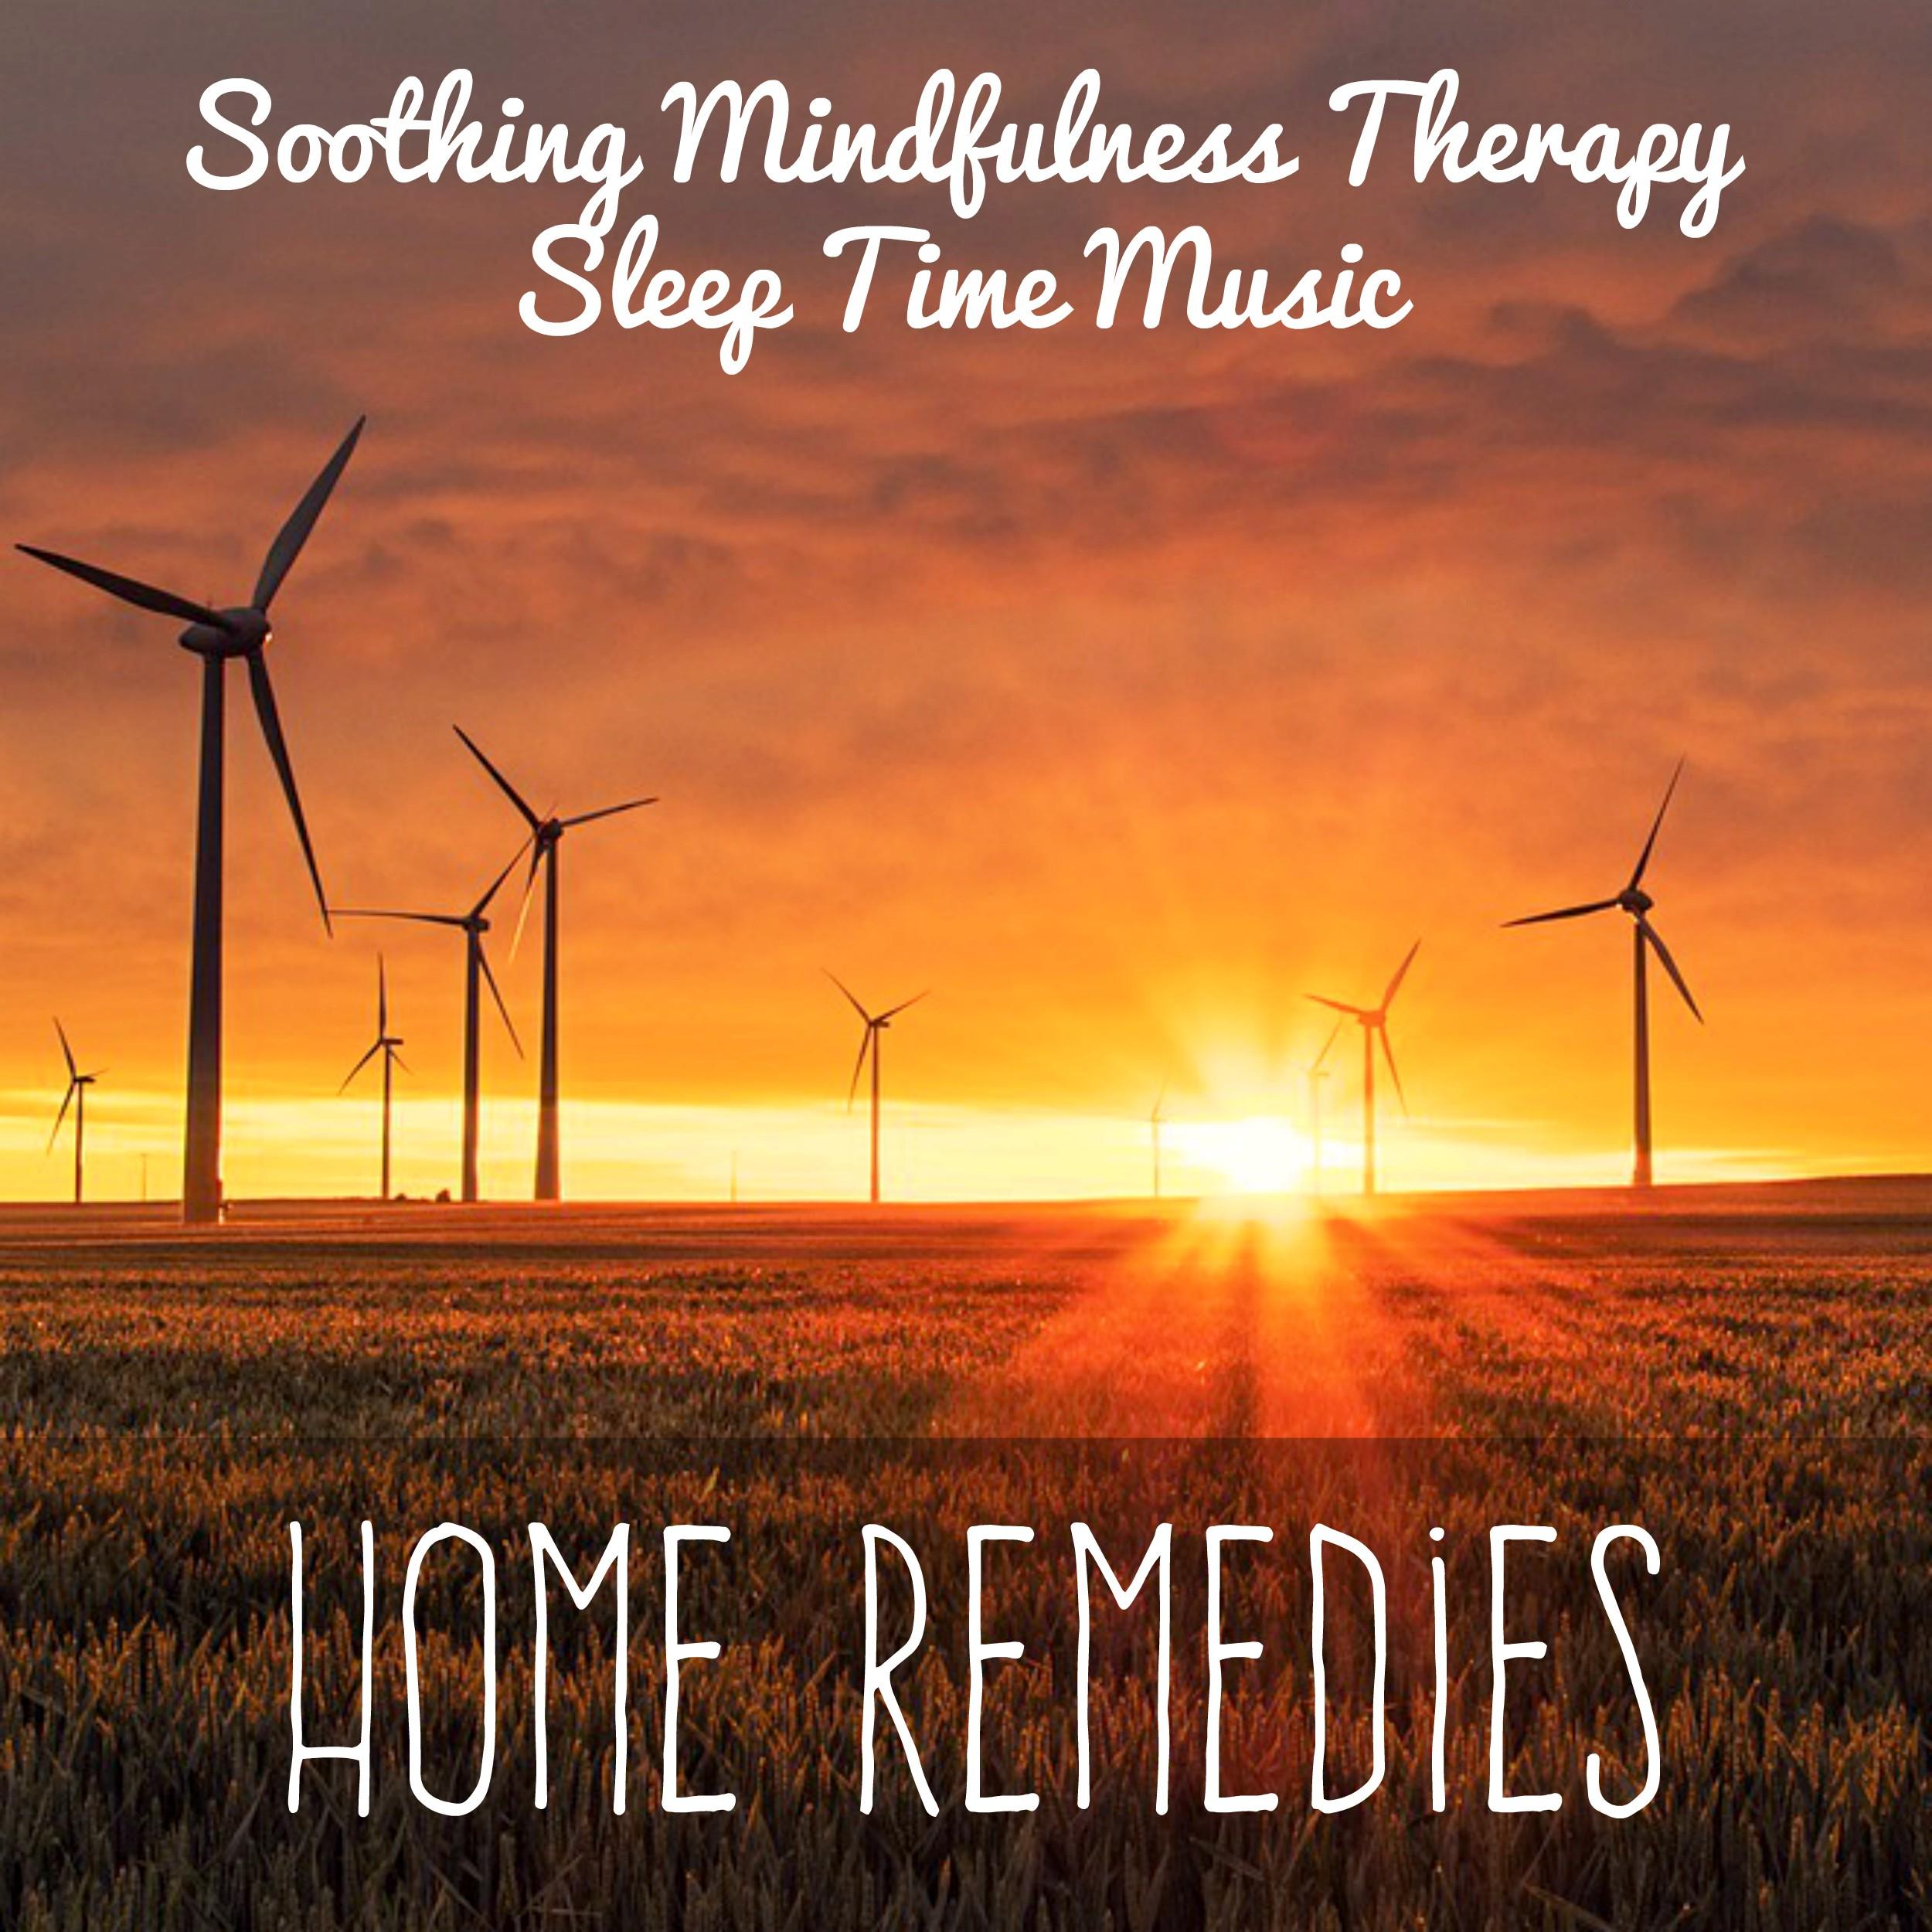 Home Remedies - Soothing Mindfulness Therapy Sleep Time Music for Pure Energy Healthy Body Strong Mind with Instrumental Binaural Sounds